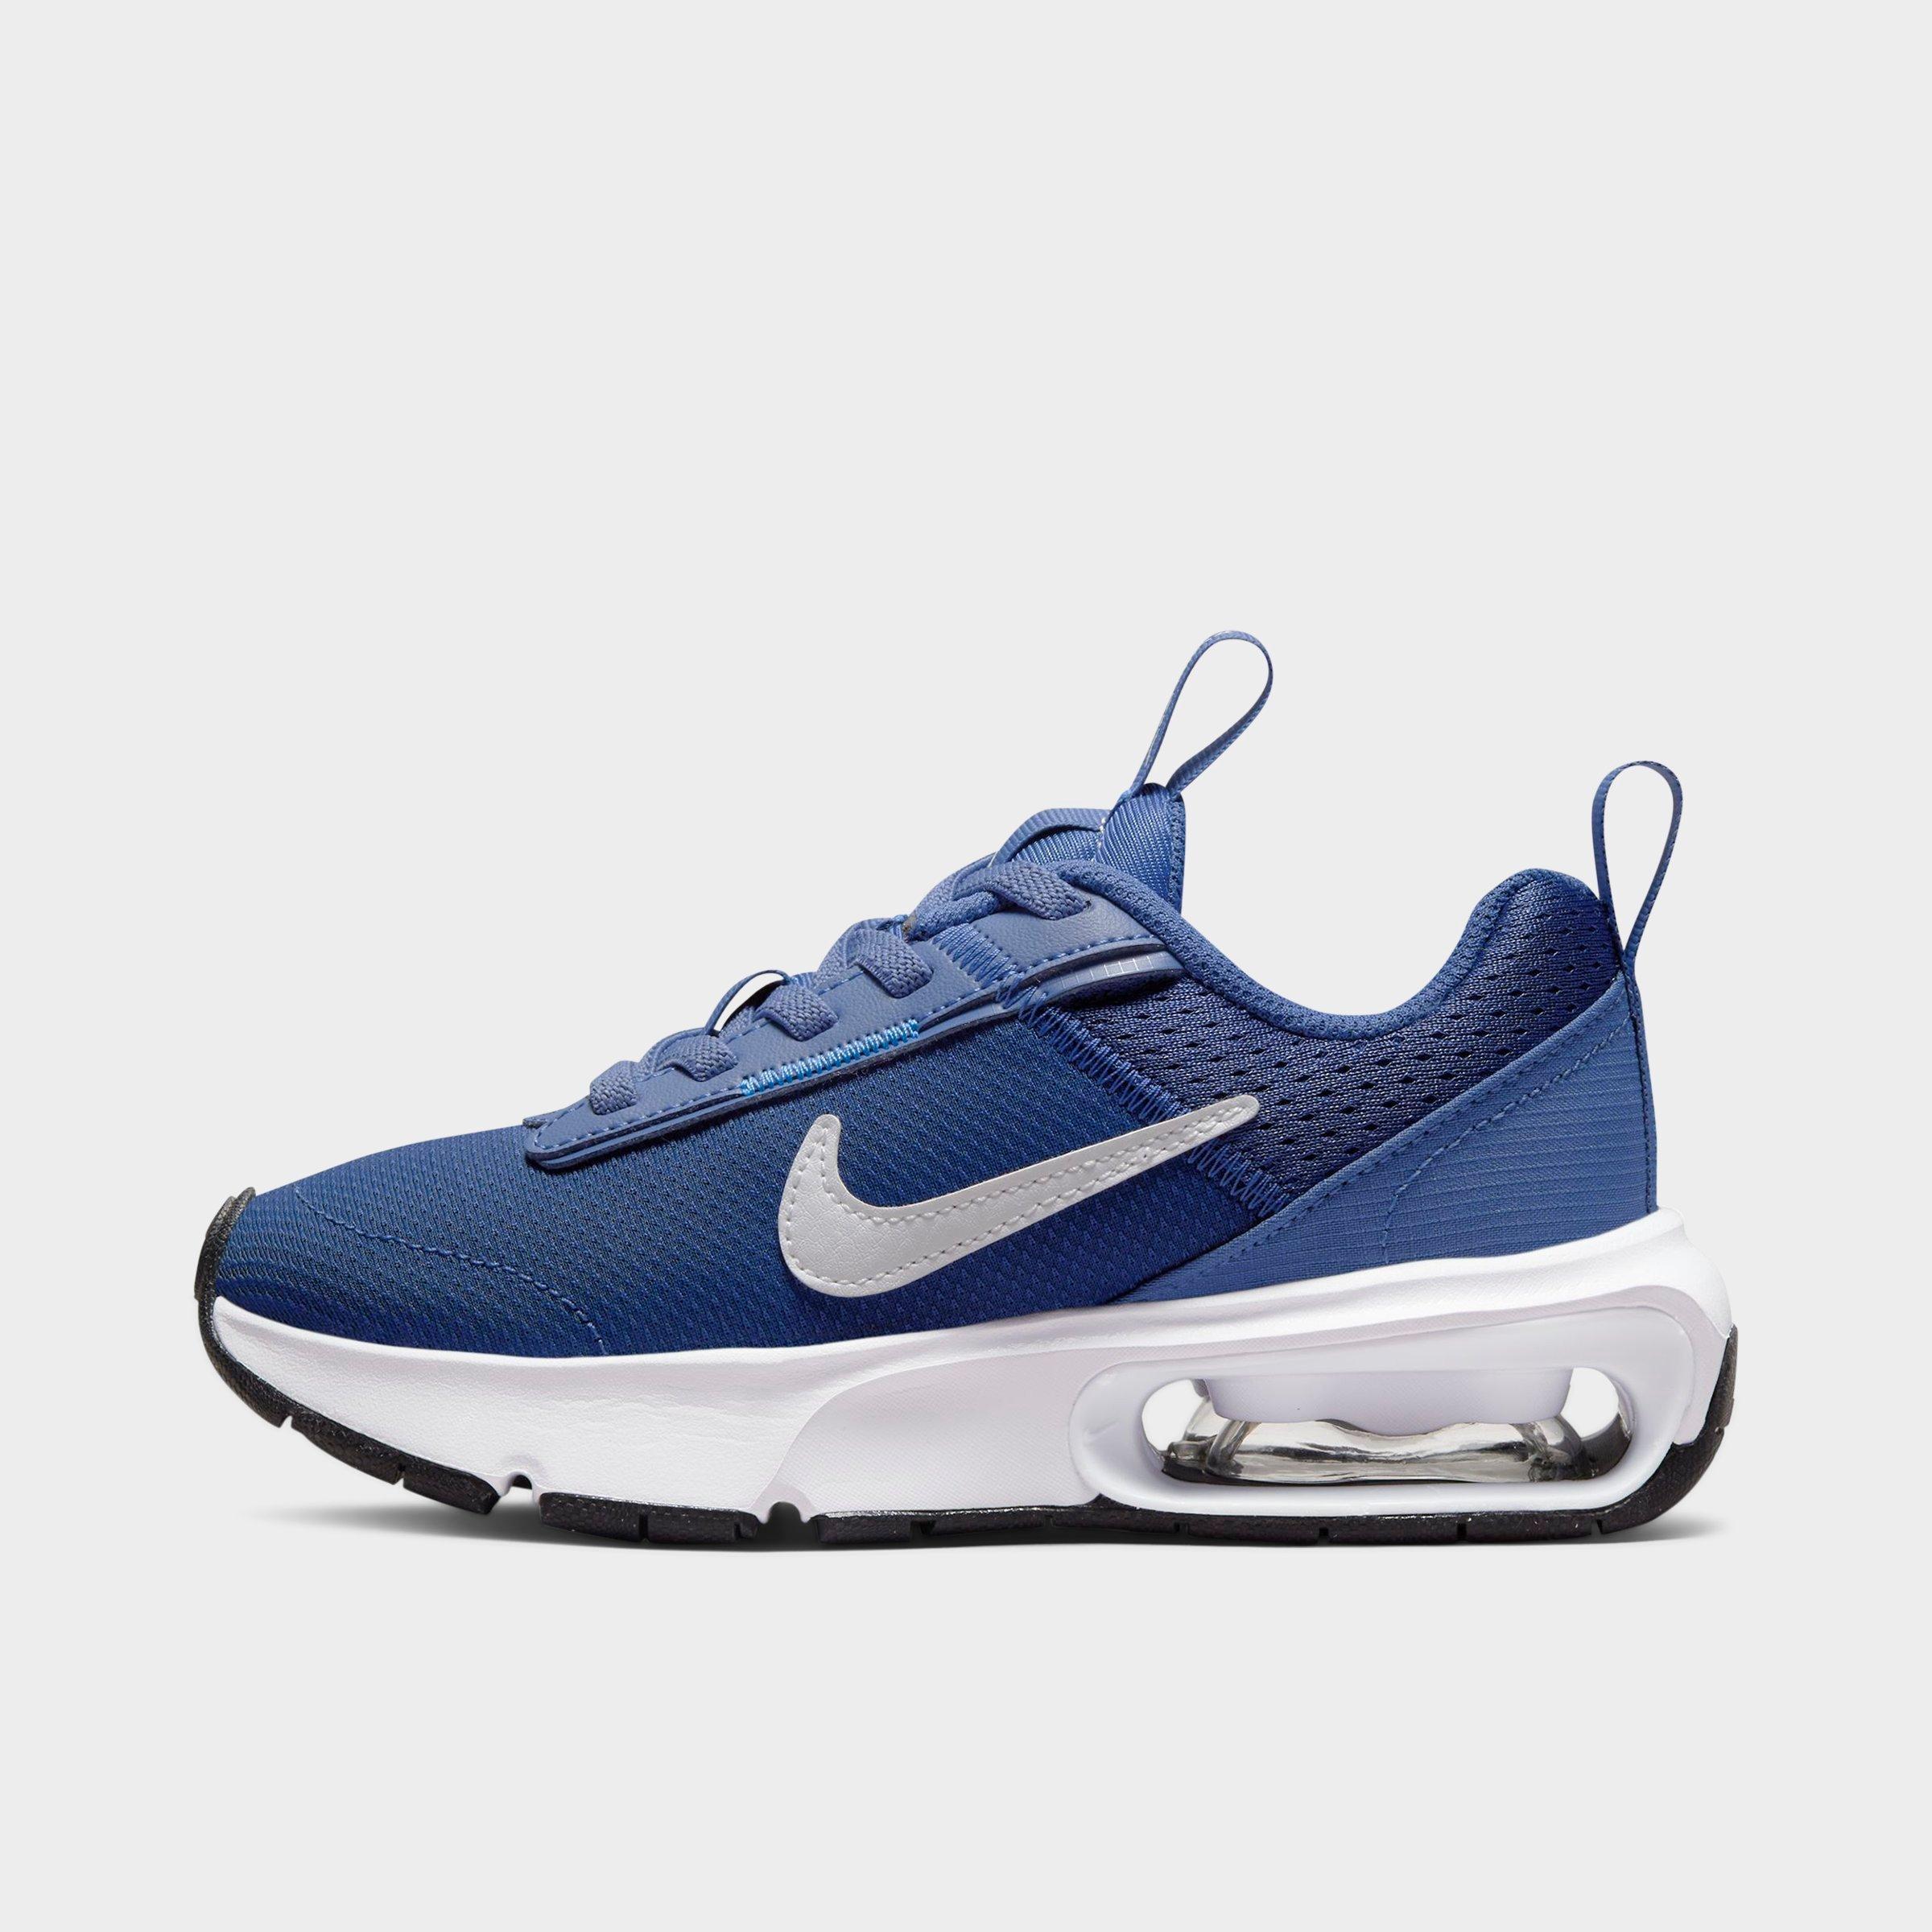 Nike Little Kids' Air Max Intrlk Lite Stretch Lace Casual Shoes In Mystic Navy/white/light Photo Blue/black